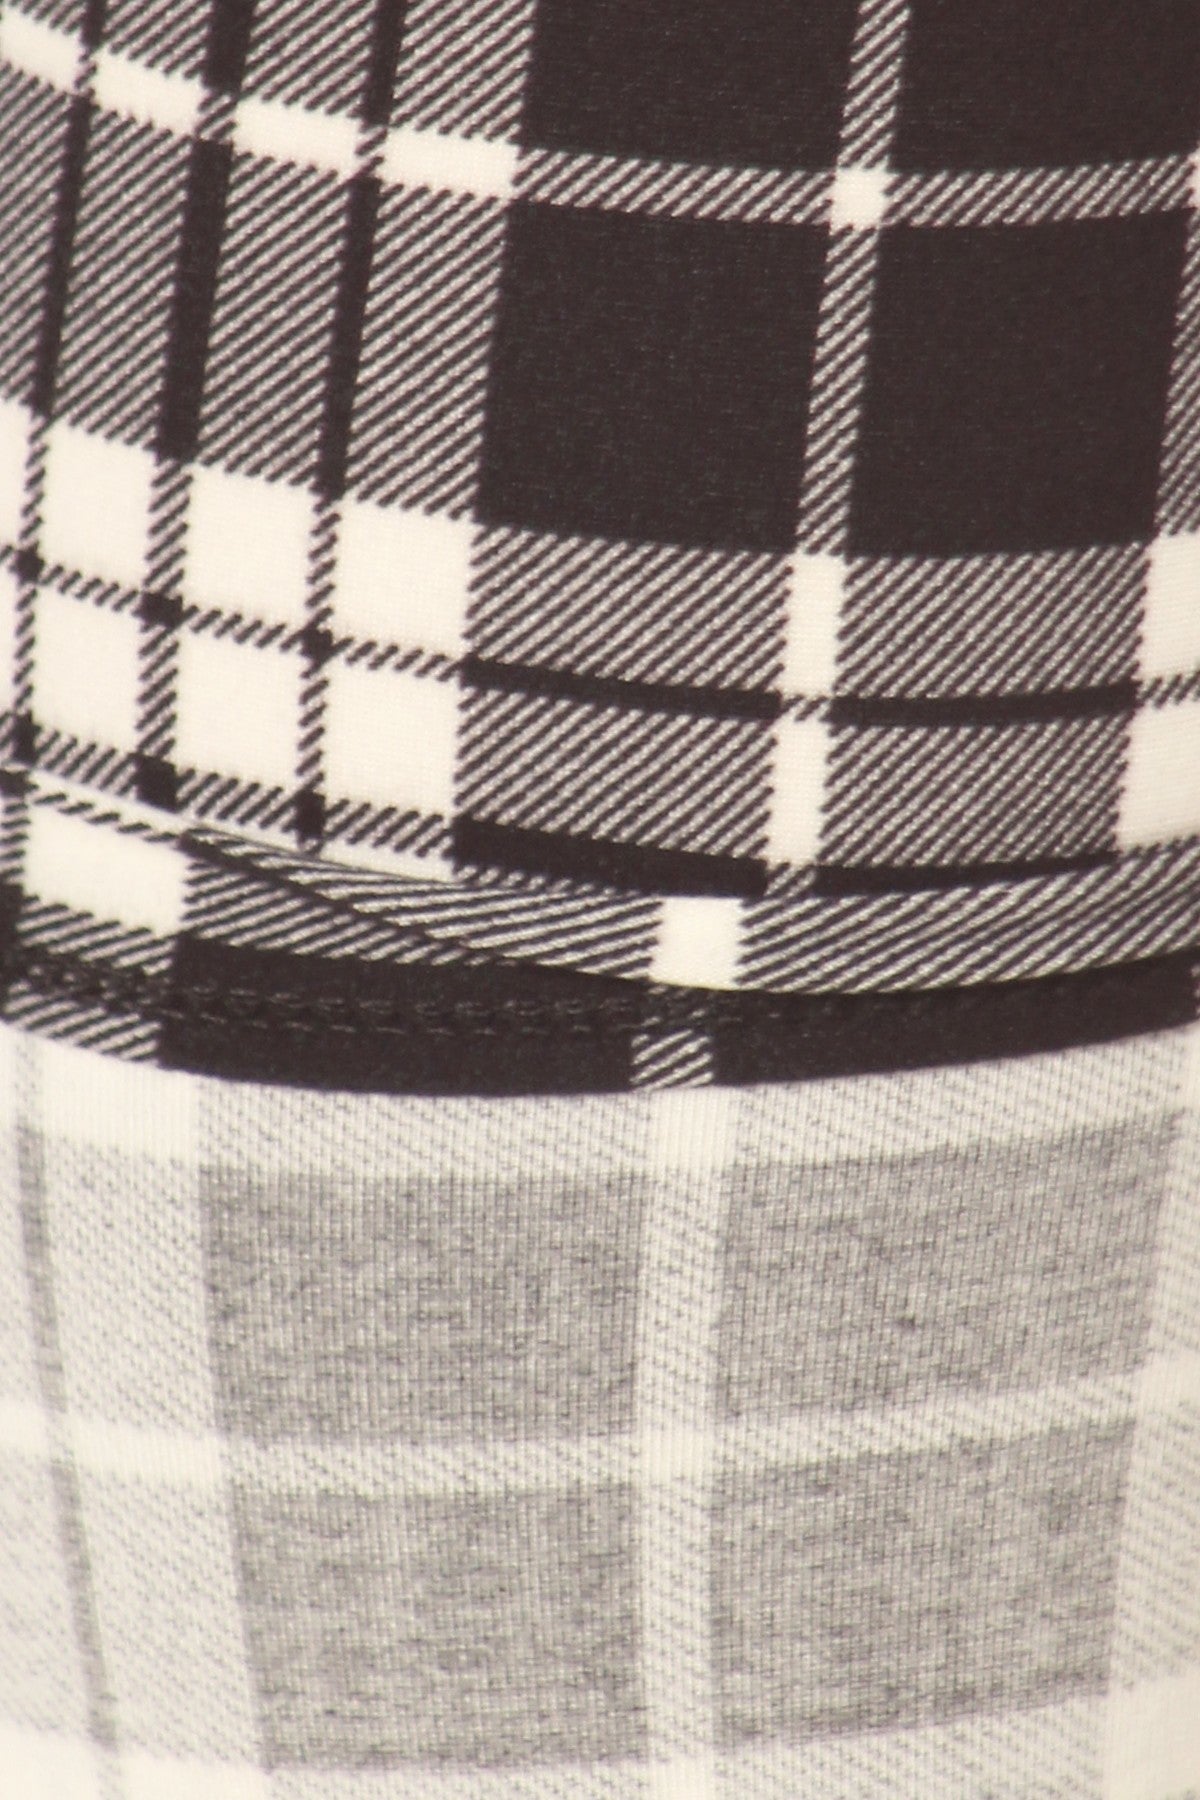 Plaid High Waisted Leggings In A Fitted Style, With An Elastic Waistband